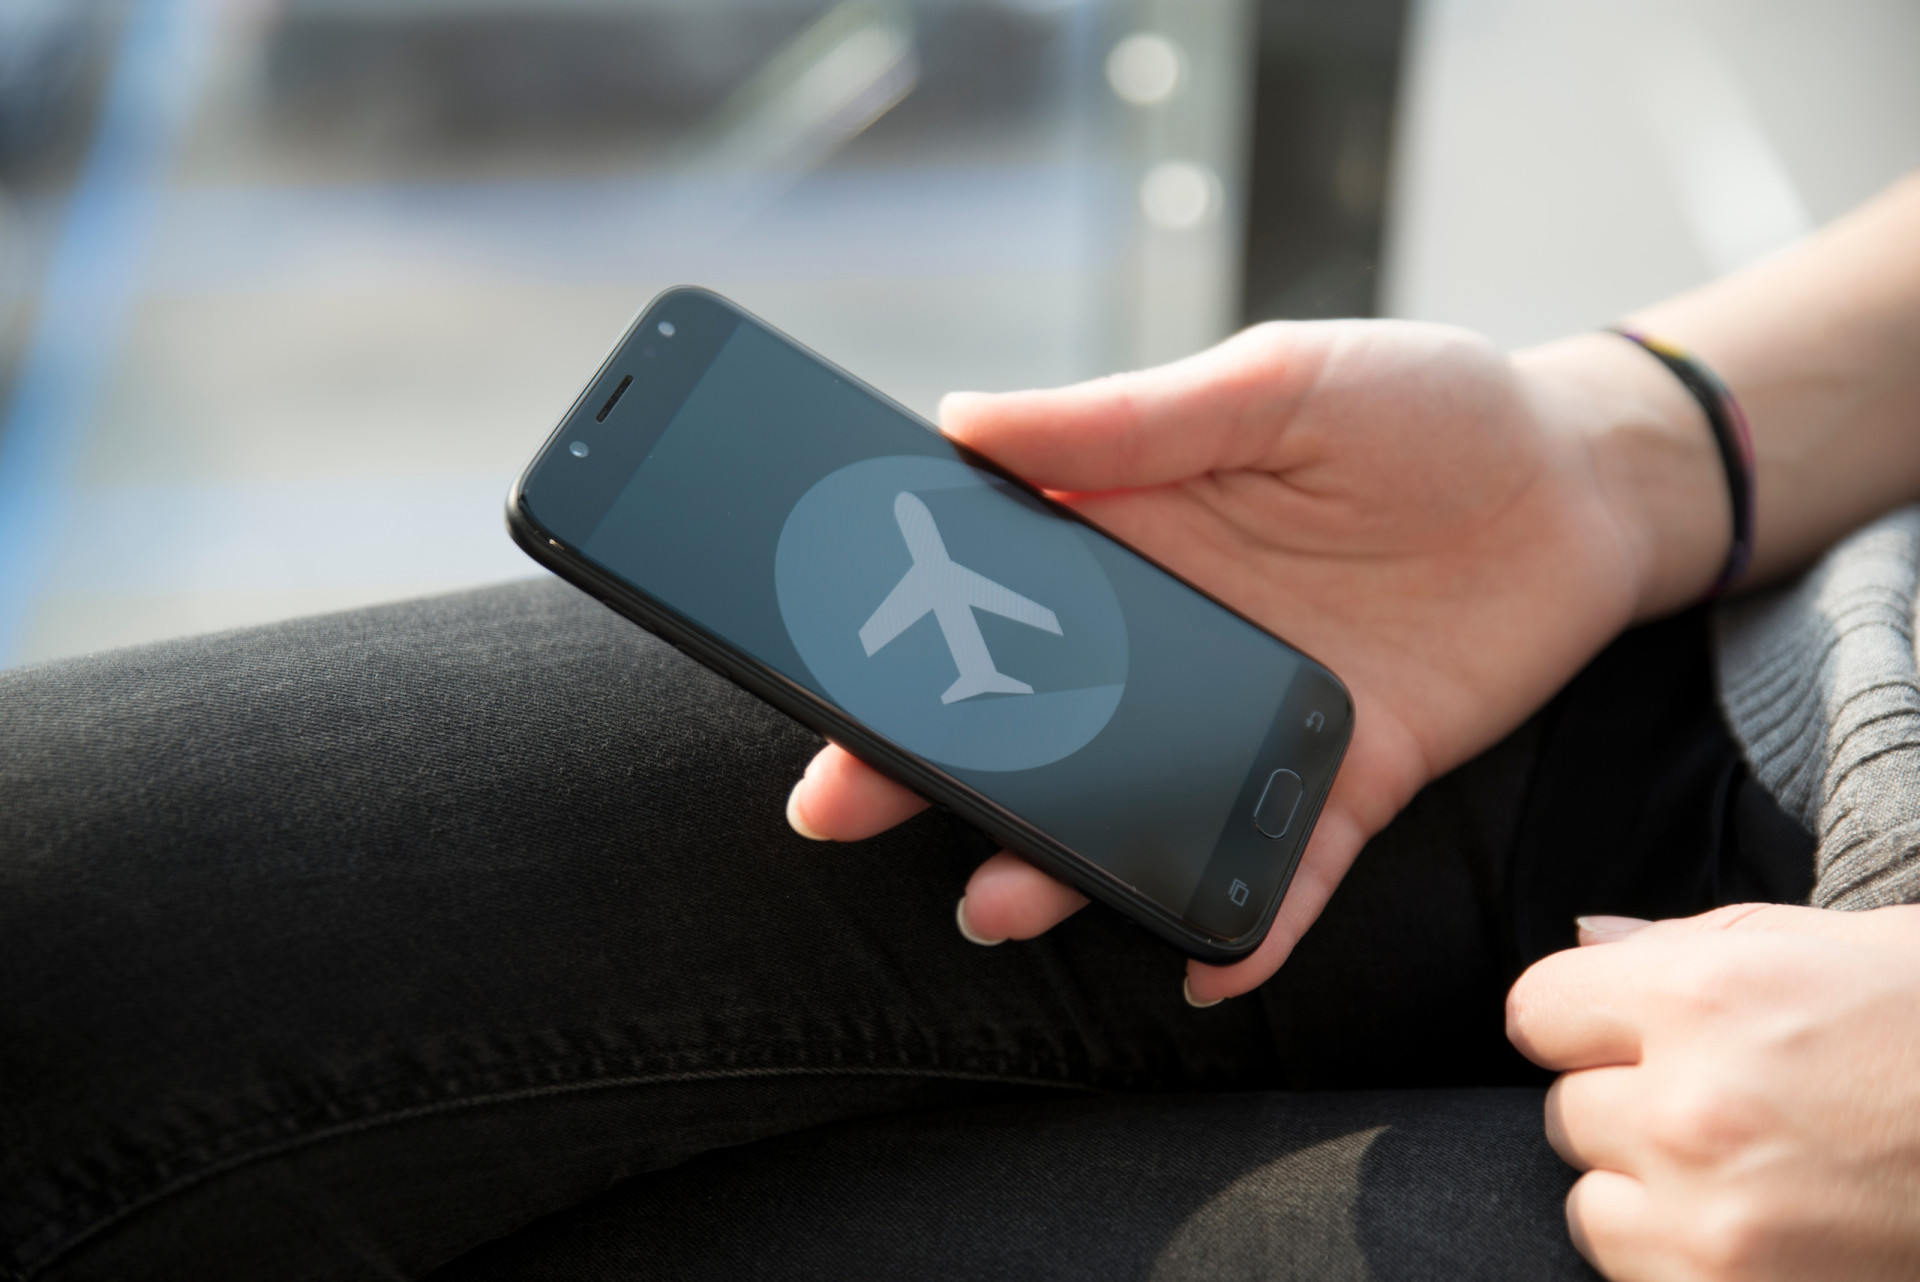 <p>Your smartphone's airplane mode doesn't just have to be for flights. You can also use airplane mode to minimize electromagnetic radiation from your phone by using airplane mode whenever you're not actively using it or expecting an important call.</p><p>You may also like:<a href="https://www.starsinsider.com/n/485668?utm_source=msn.com&utm_medium=display&utm_campaign=referral_description&utm_content=550315en-us"> What really happens during an autopsy</a></p>